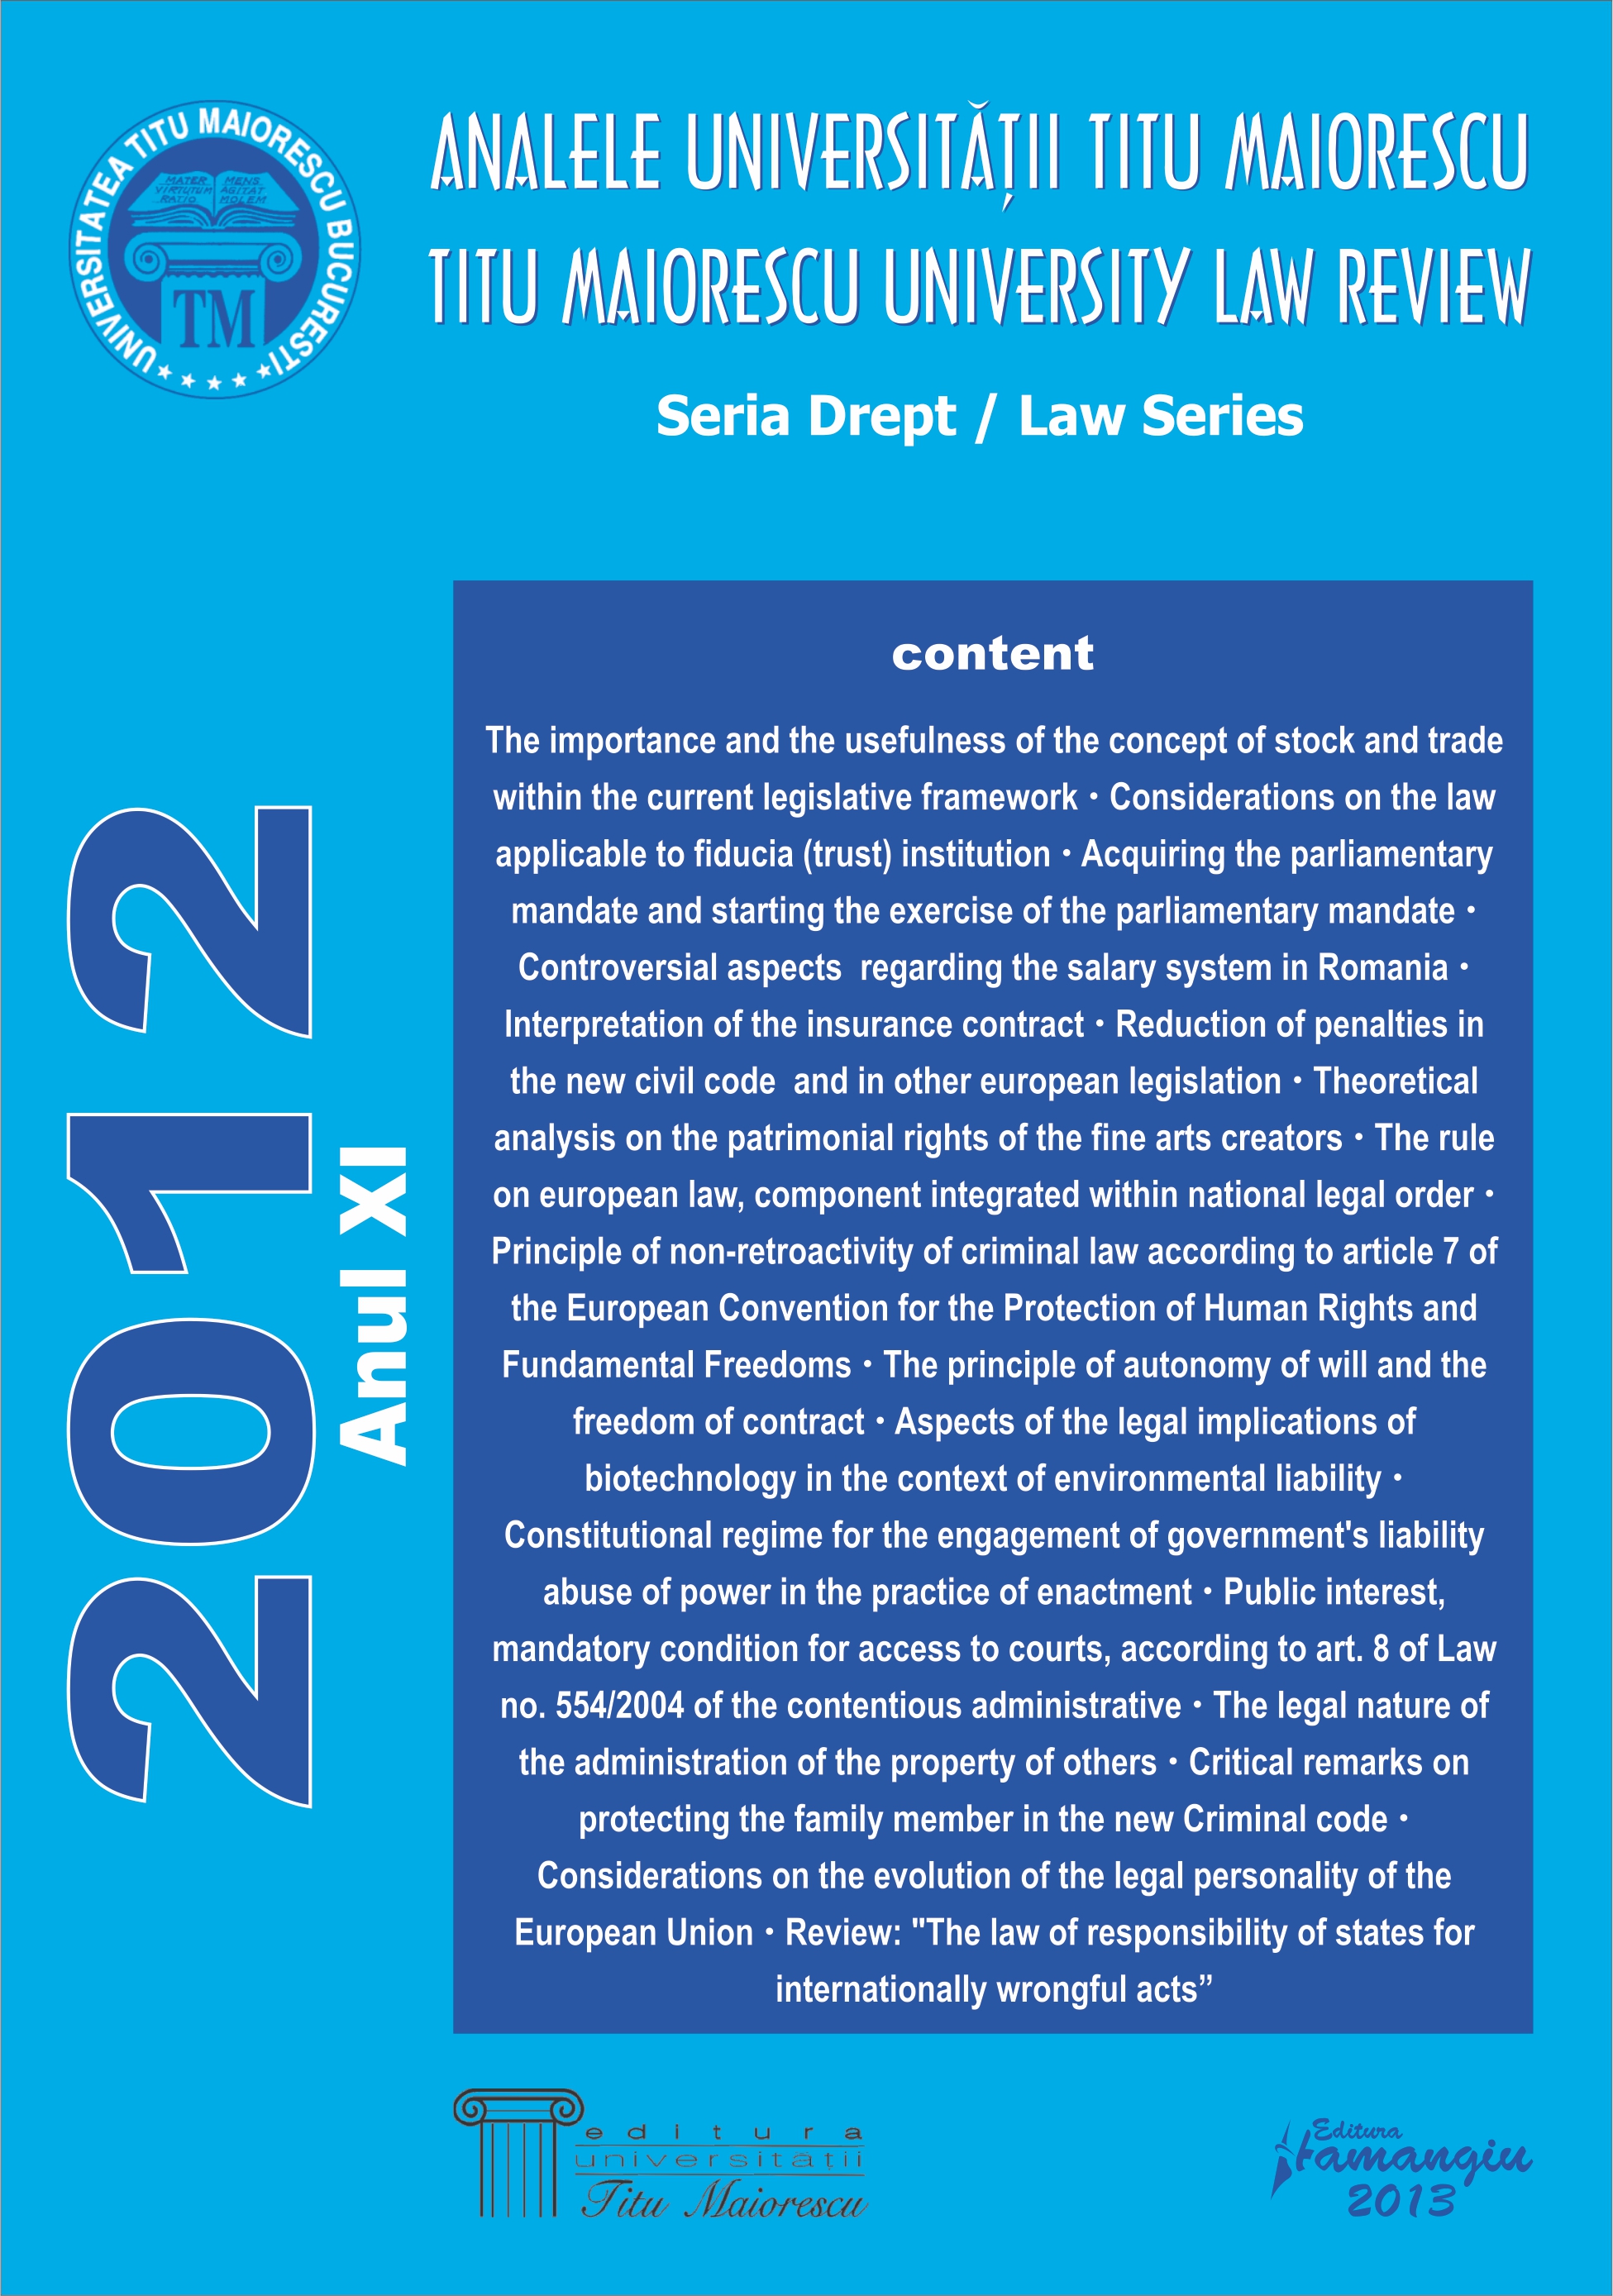 CONSIDERATIONS ON THE EVOLUTION OF THE
LEGAL PERSONALITY OF THE EUROPEAN UNION Cover Image